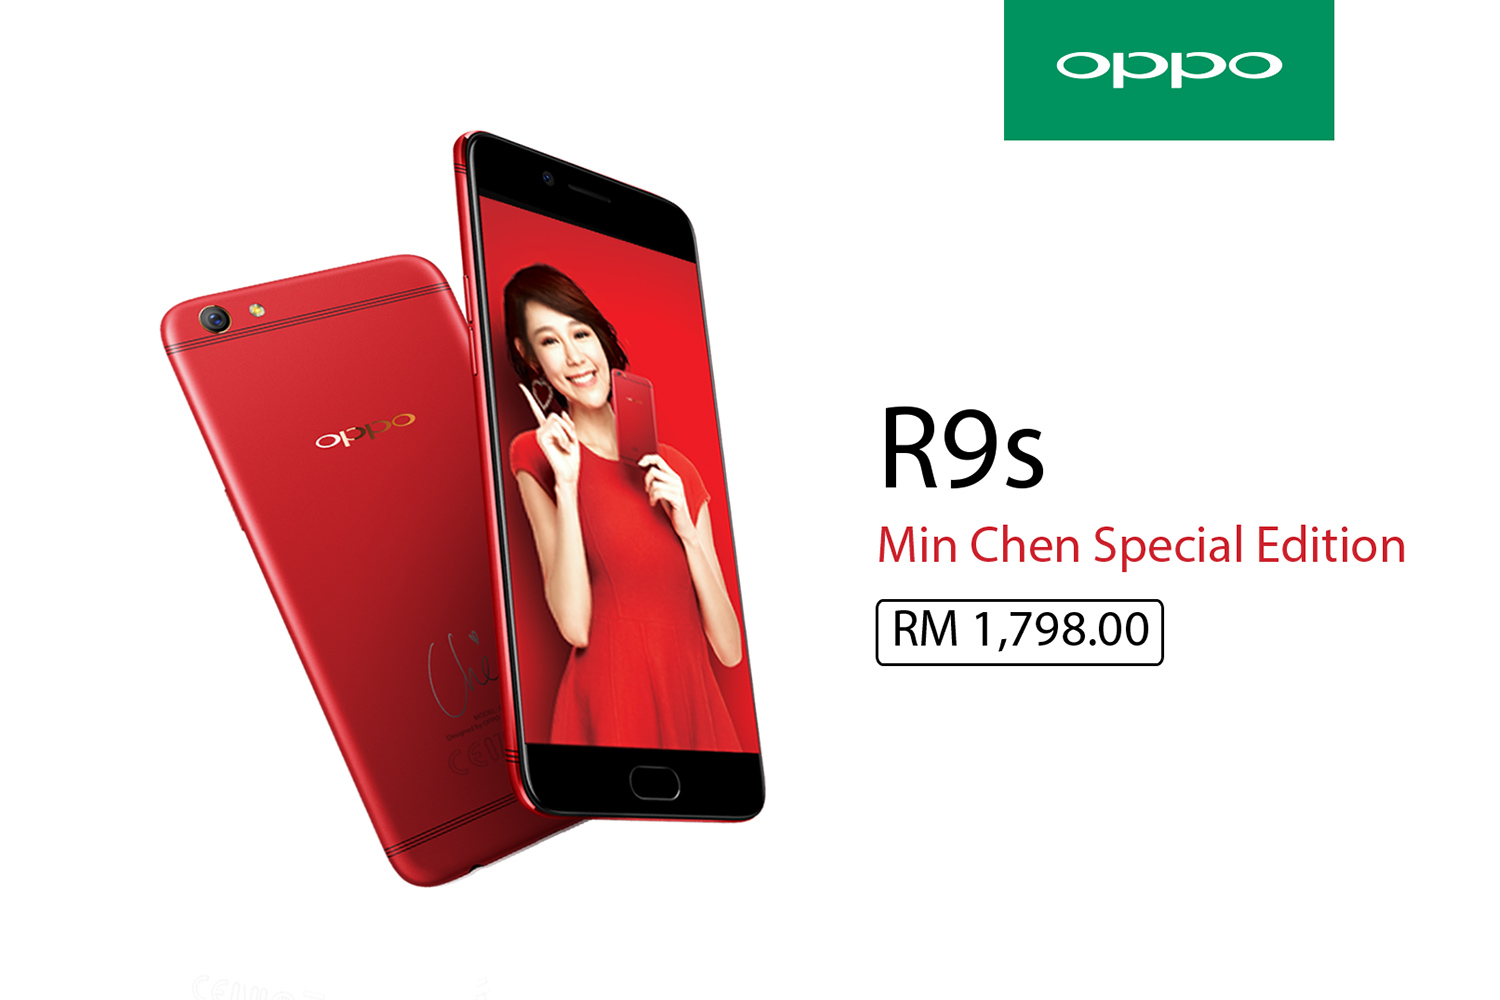 OPPO R9s Min Chen Special Edition Officially Priced at RM1,798